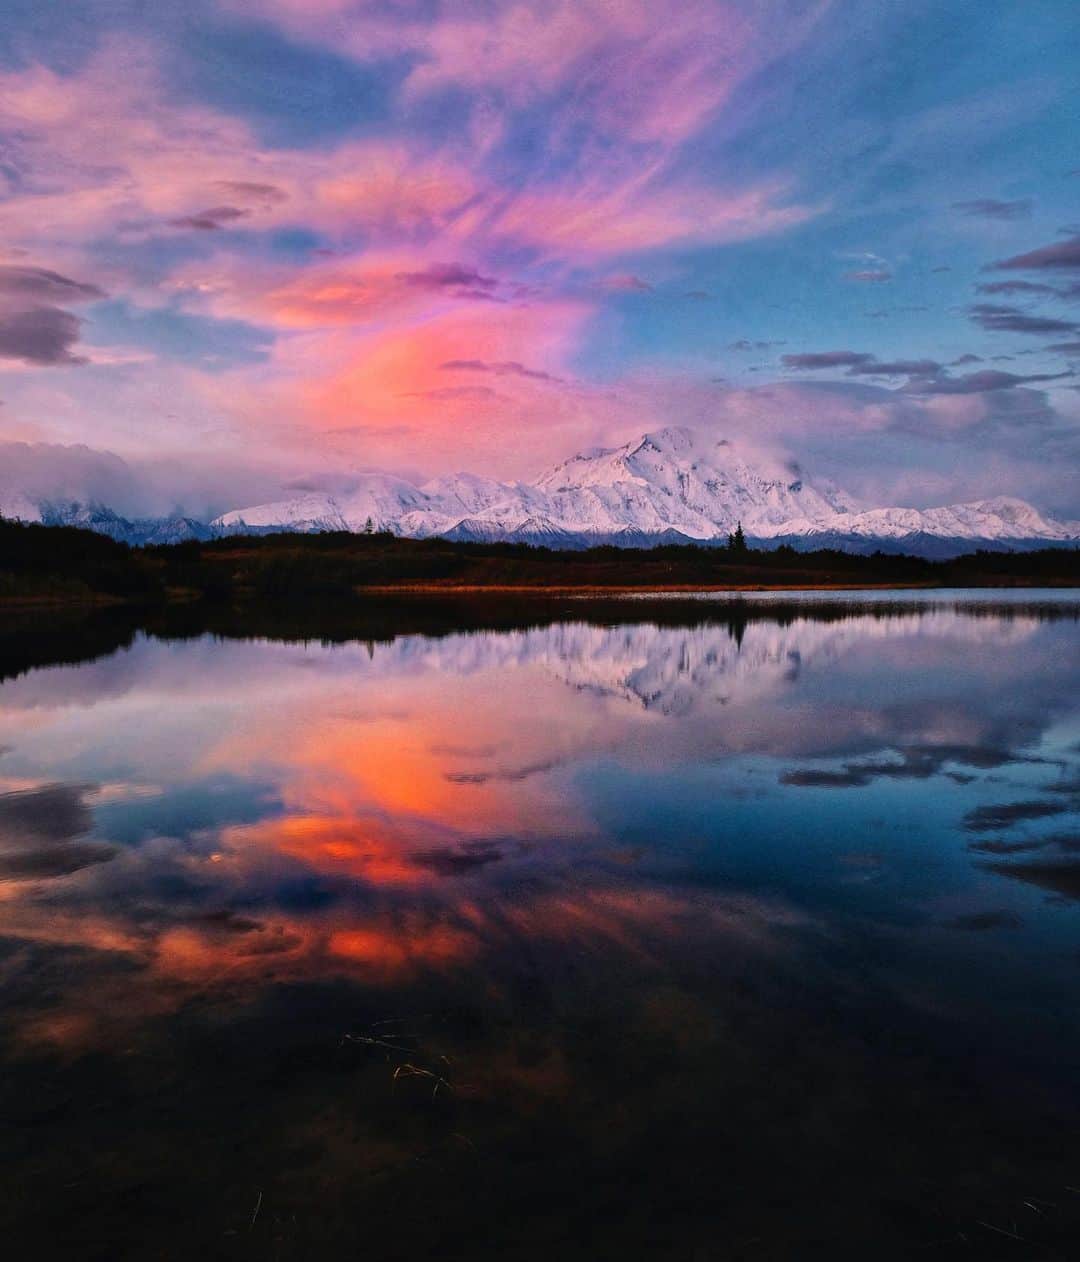 kaelのインスタグラム：「One of my favourite and most cherished travel memories is my trip to Denali National Park and Preserve with @pursuitalaska. Denali is the highest mountain peak in North America and only 30% of people who visit the park get even a glimpse. We were treated with top to bottom views, three days in a row. Truly glorious! I look forward to another visit when it’s safe to travel again. @denalibackcountrylodge #pursuitlife」